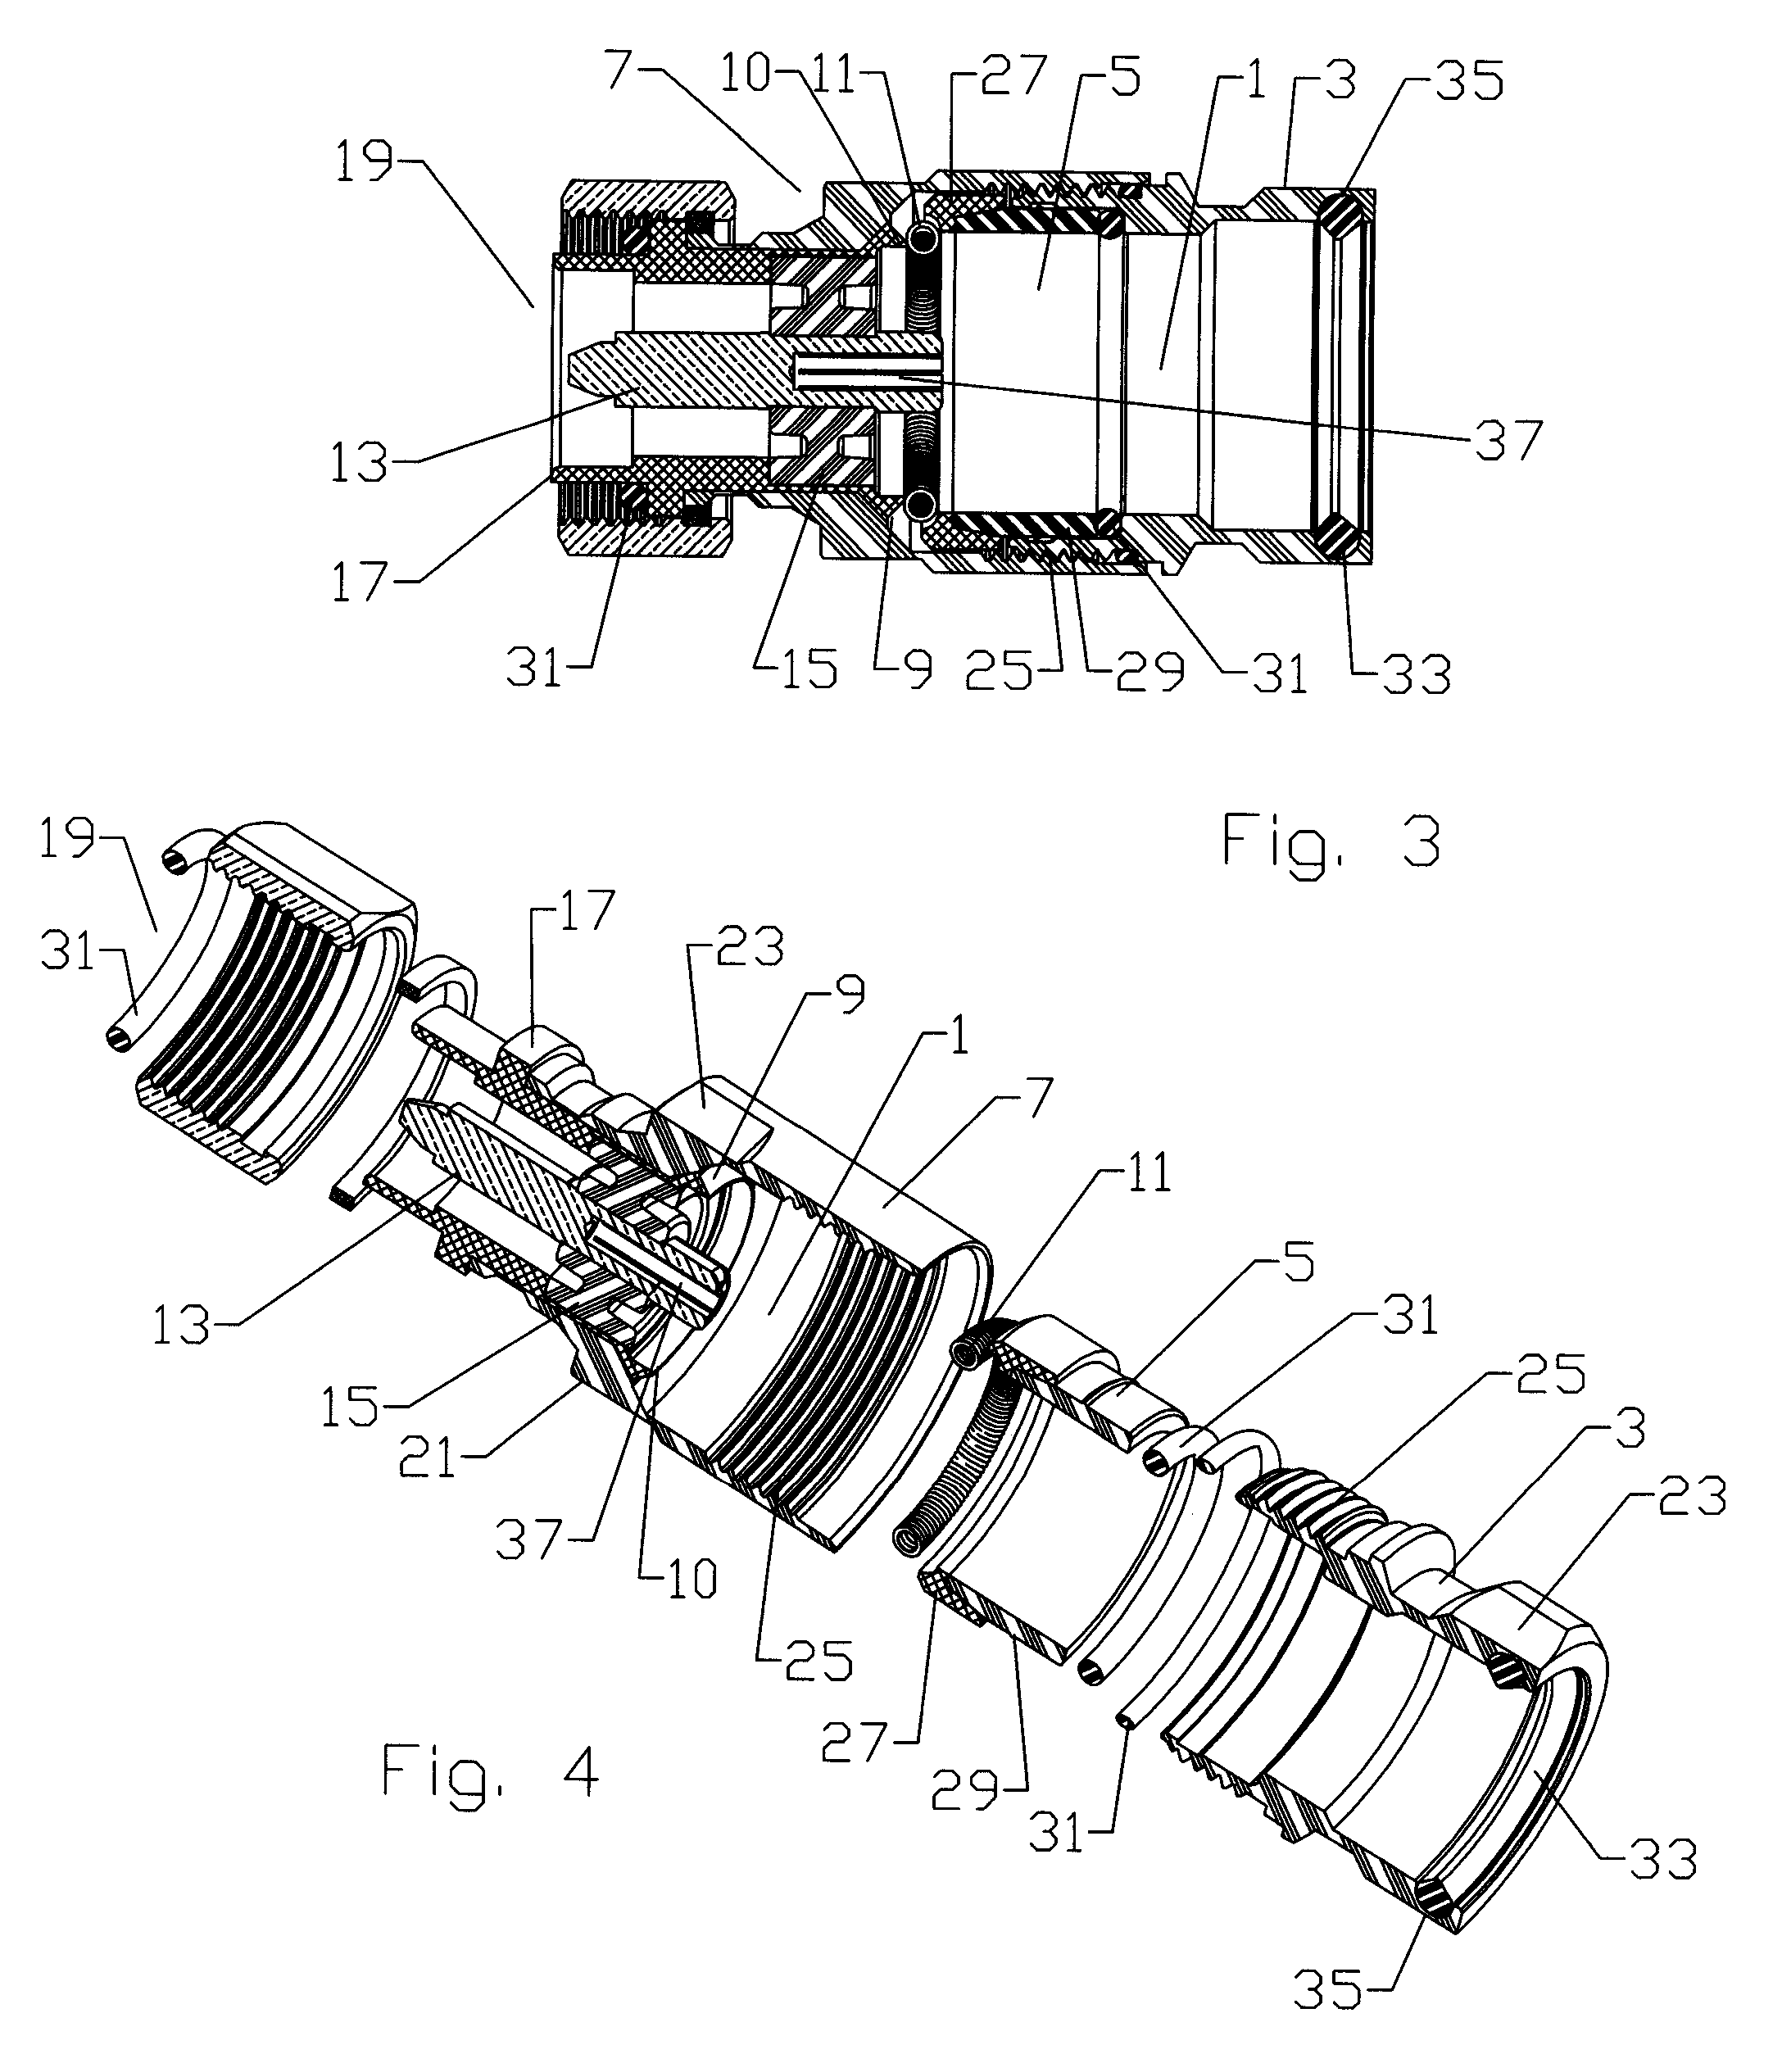 Multi-shot coaxial connector and method of manufacture